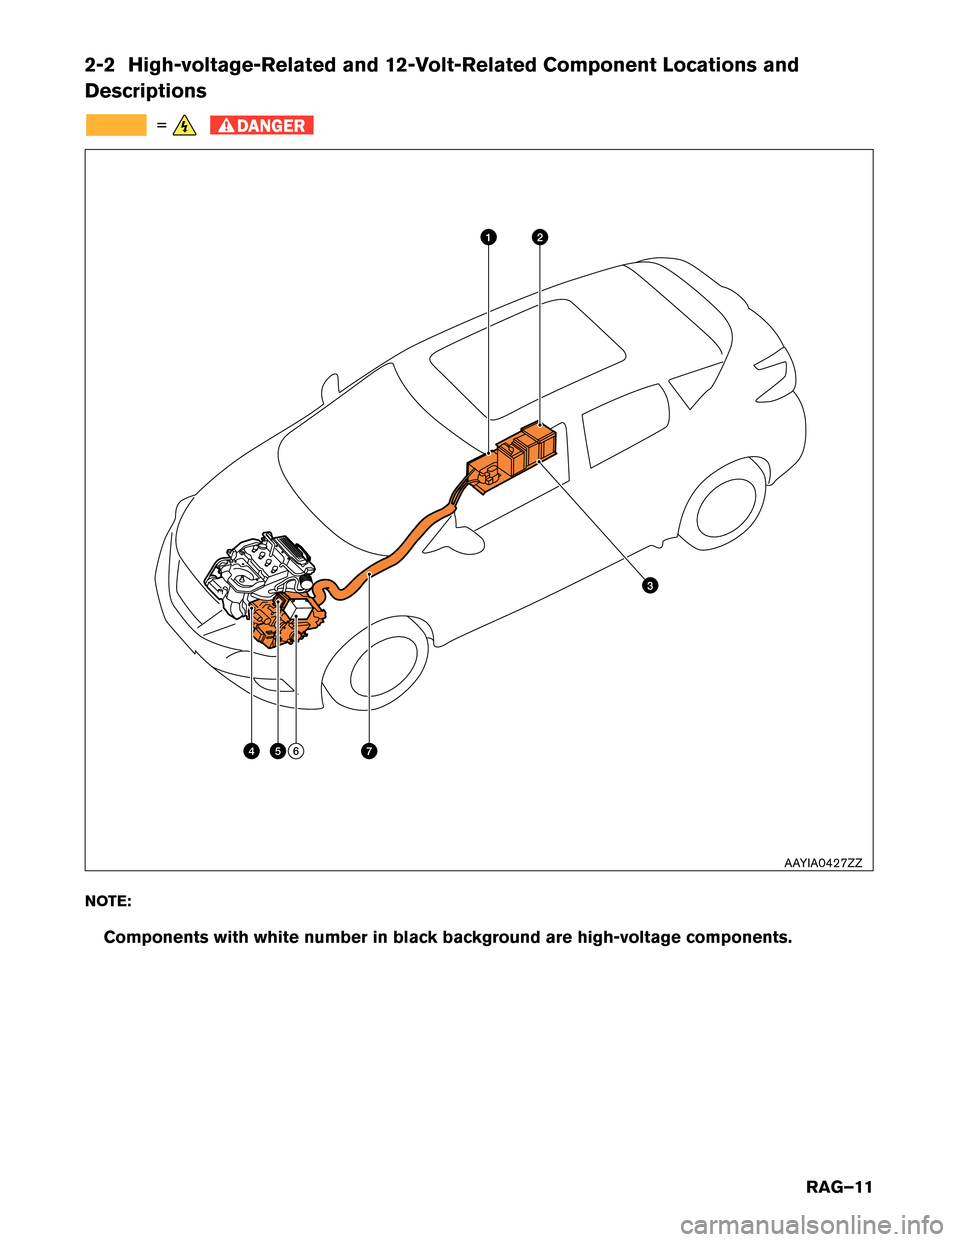 NISSAN MURANO HYBRID 2016 3.G Roadside Assistance Guide 2-2 High-voltage-Related and 12-Volt-Related Component Locations and
Descriptions
=
DANGER
NOTE:
Components with white number in black background are high-voltage components. 5 74 6 2
31
AAYIA0427ZZ
R